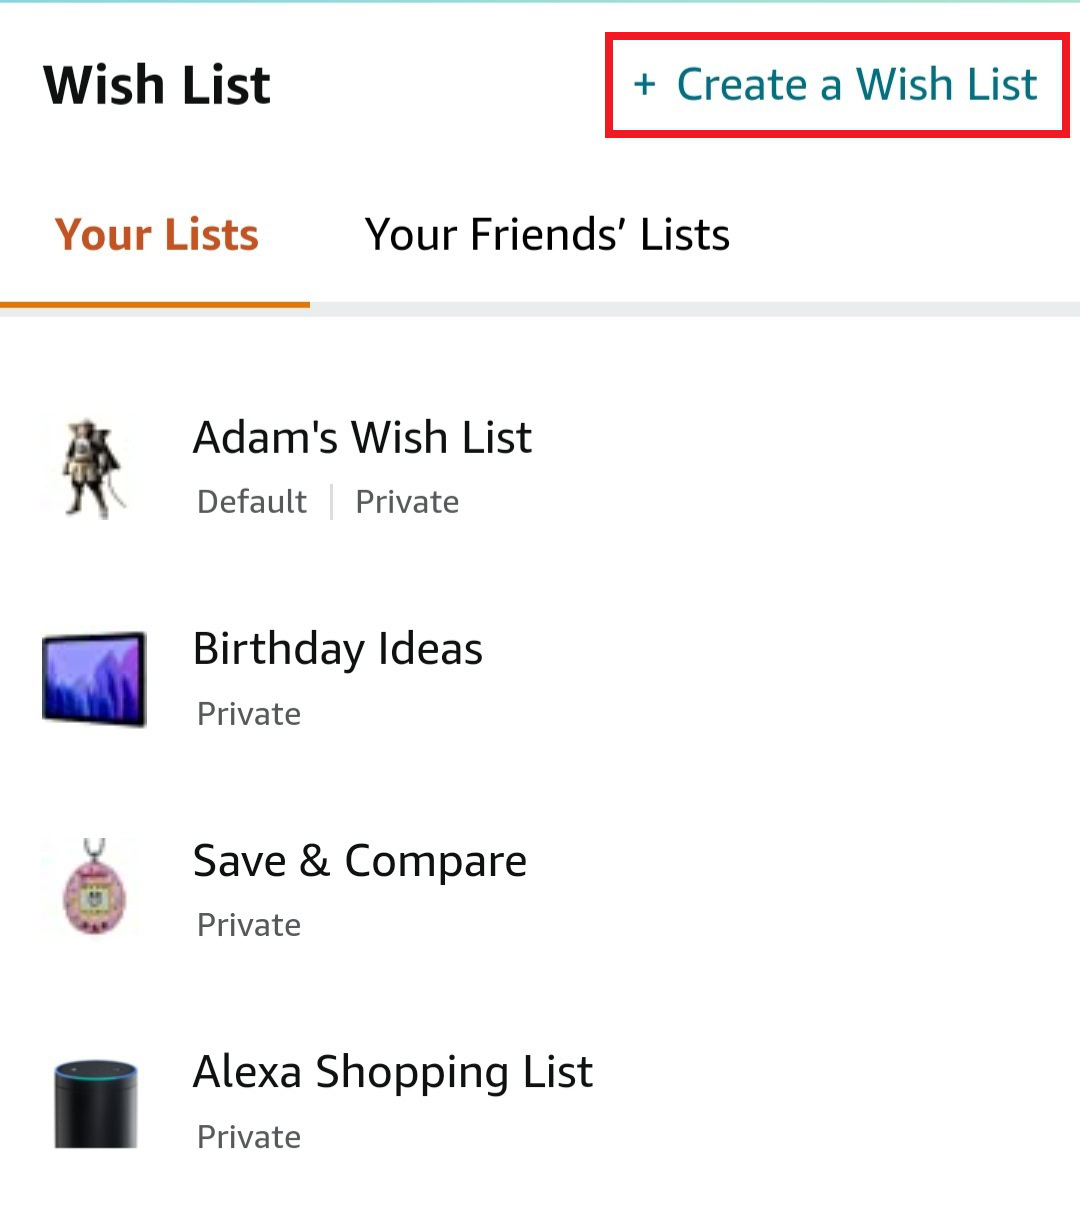 https://www.androidauthority.com/wp-content/uploads/2022/06/create-wish-list-mobile.jpg